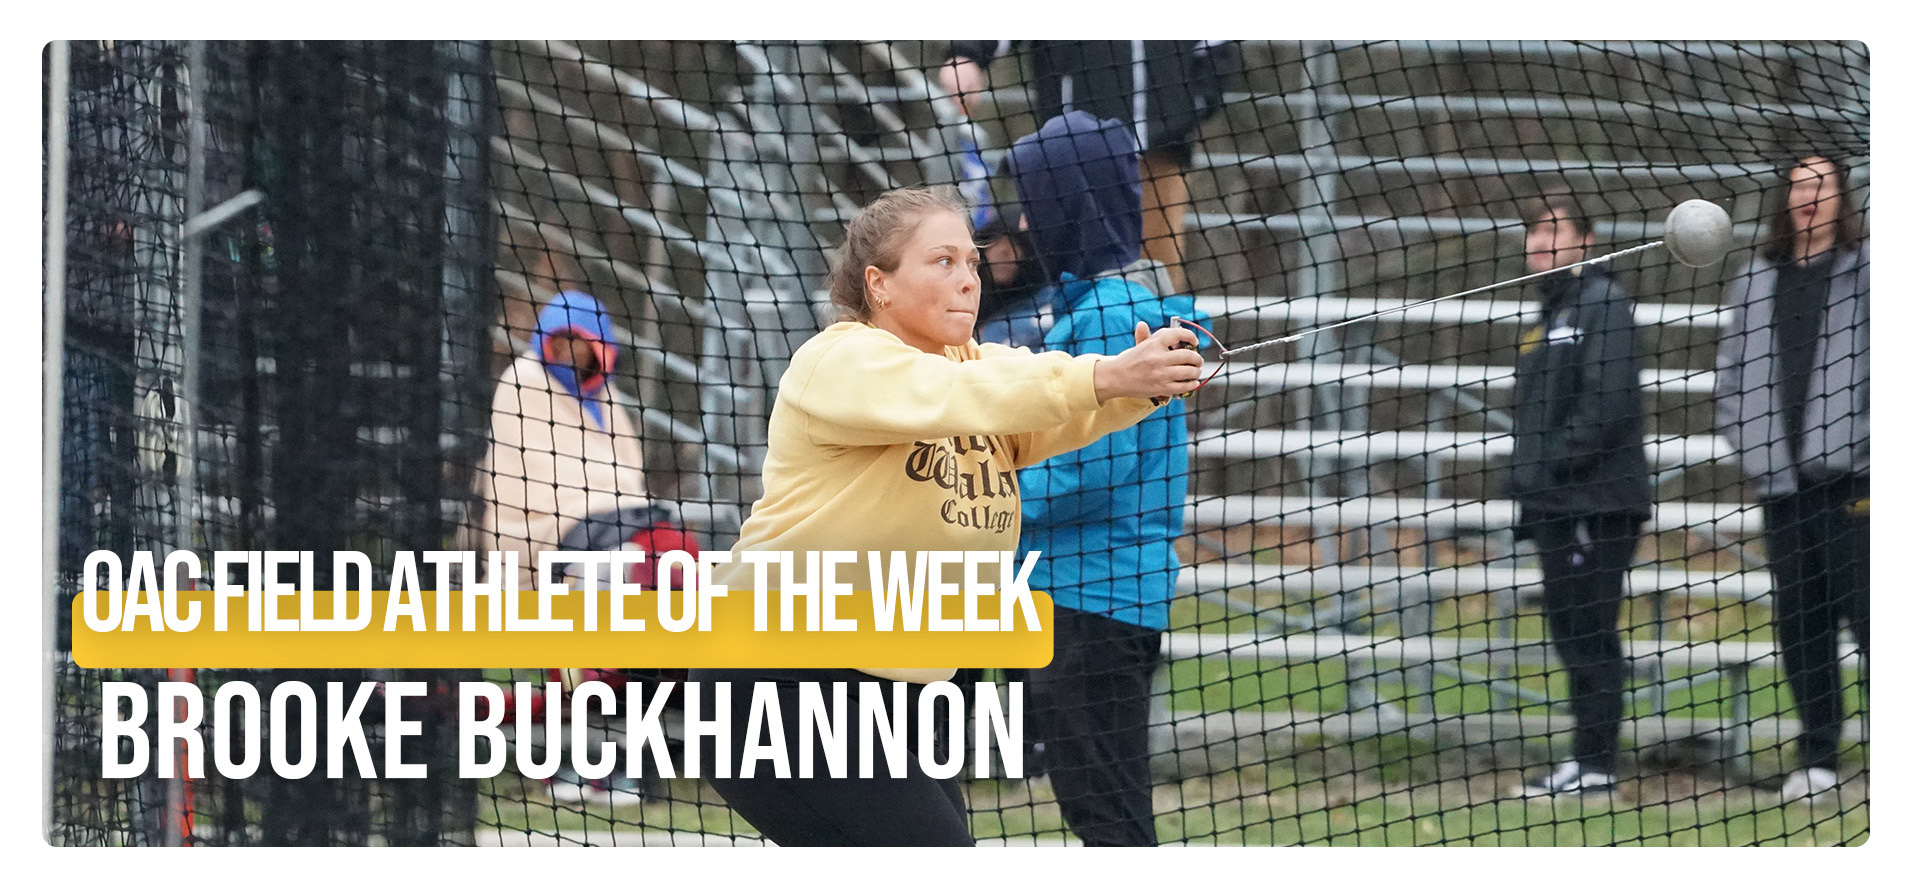 Buckhannon Receives Fifth Career OAC Women's Outdoor Field Athlete of the Week Honor